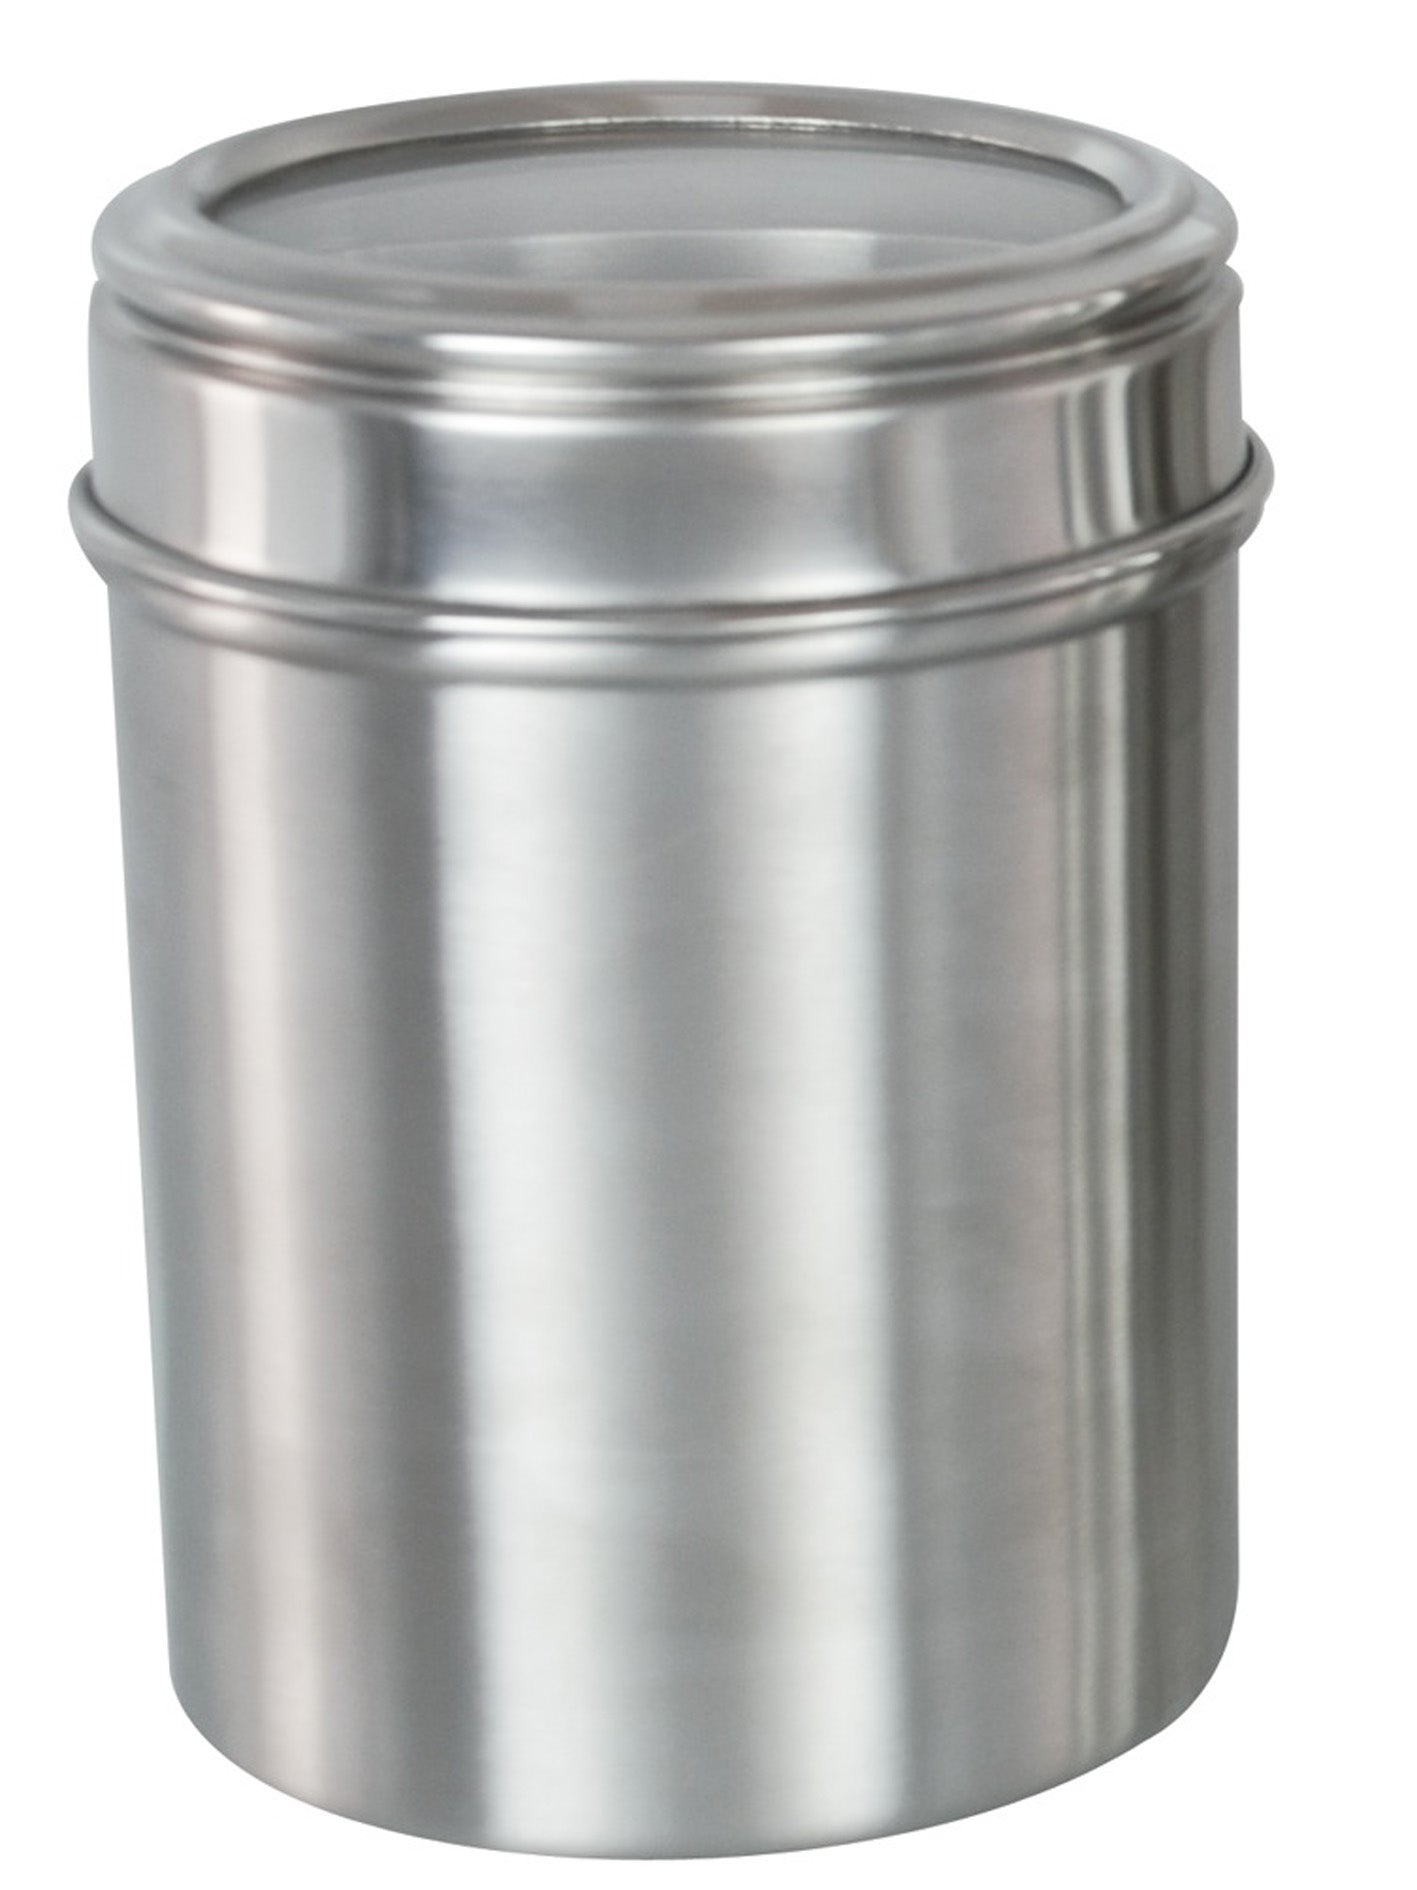 Buckingham Stainless Steel Storage Canisters with Matte Finish Acrylic Lid, 14 cm Matt Finish